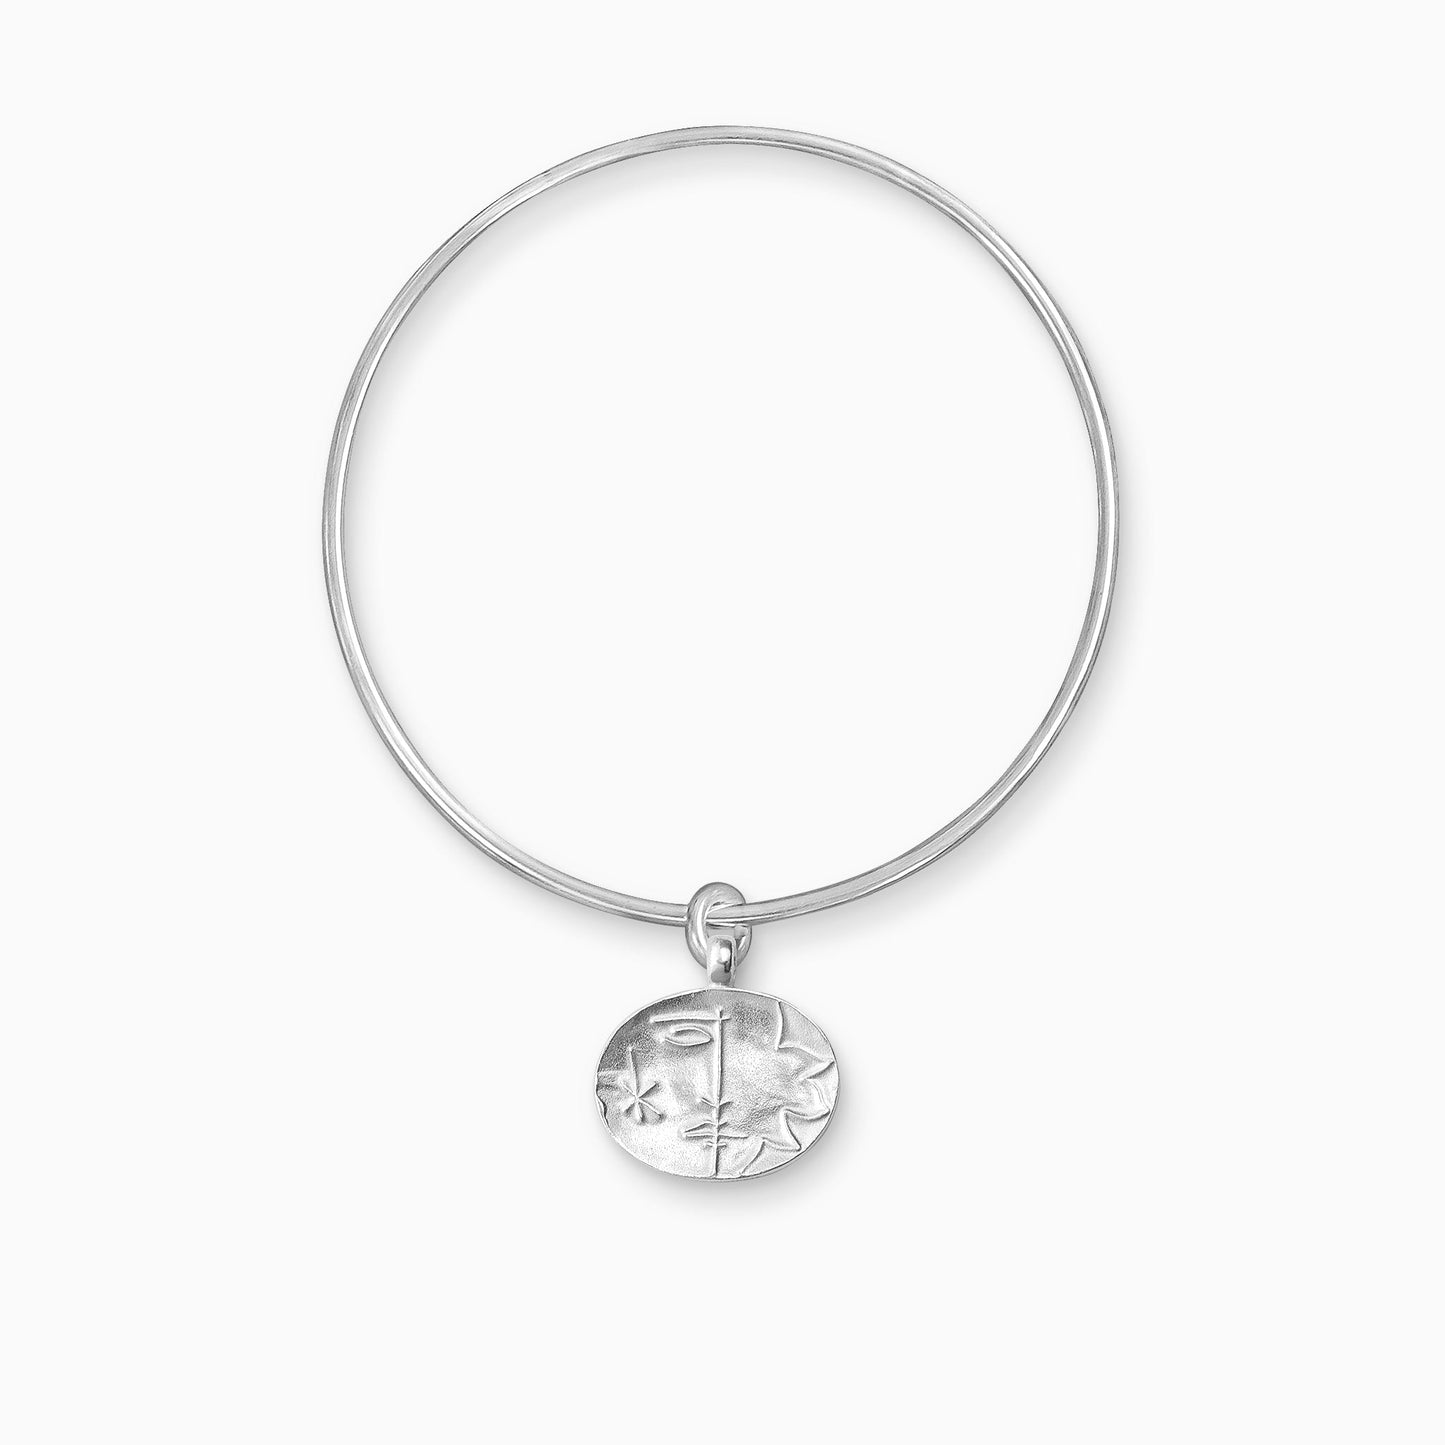 A recycled Silver oval shaped charm with raised image of a Sun on one side and a Moon on the other, freely moving on a round wire bangle.  Charm 16mm x 20mm. Bangle 63mm inside diameter x 2mm round wire.